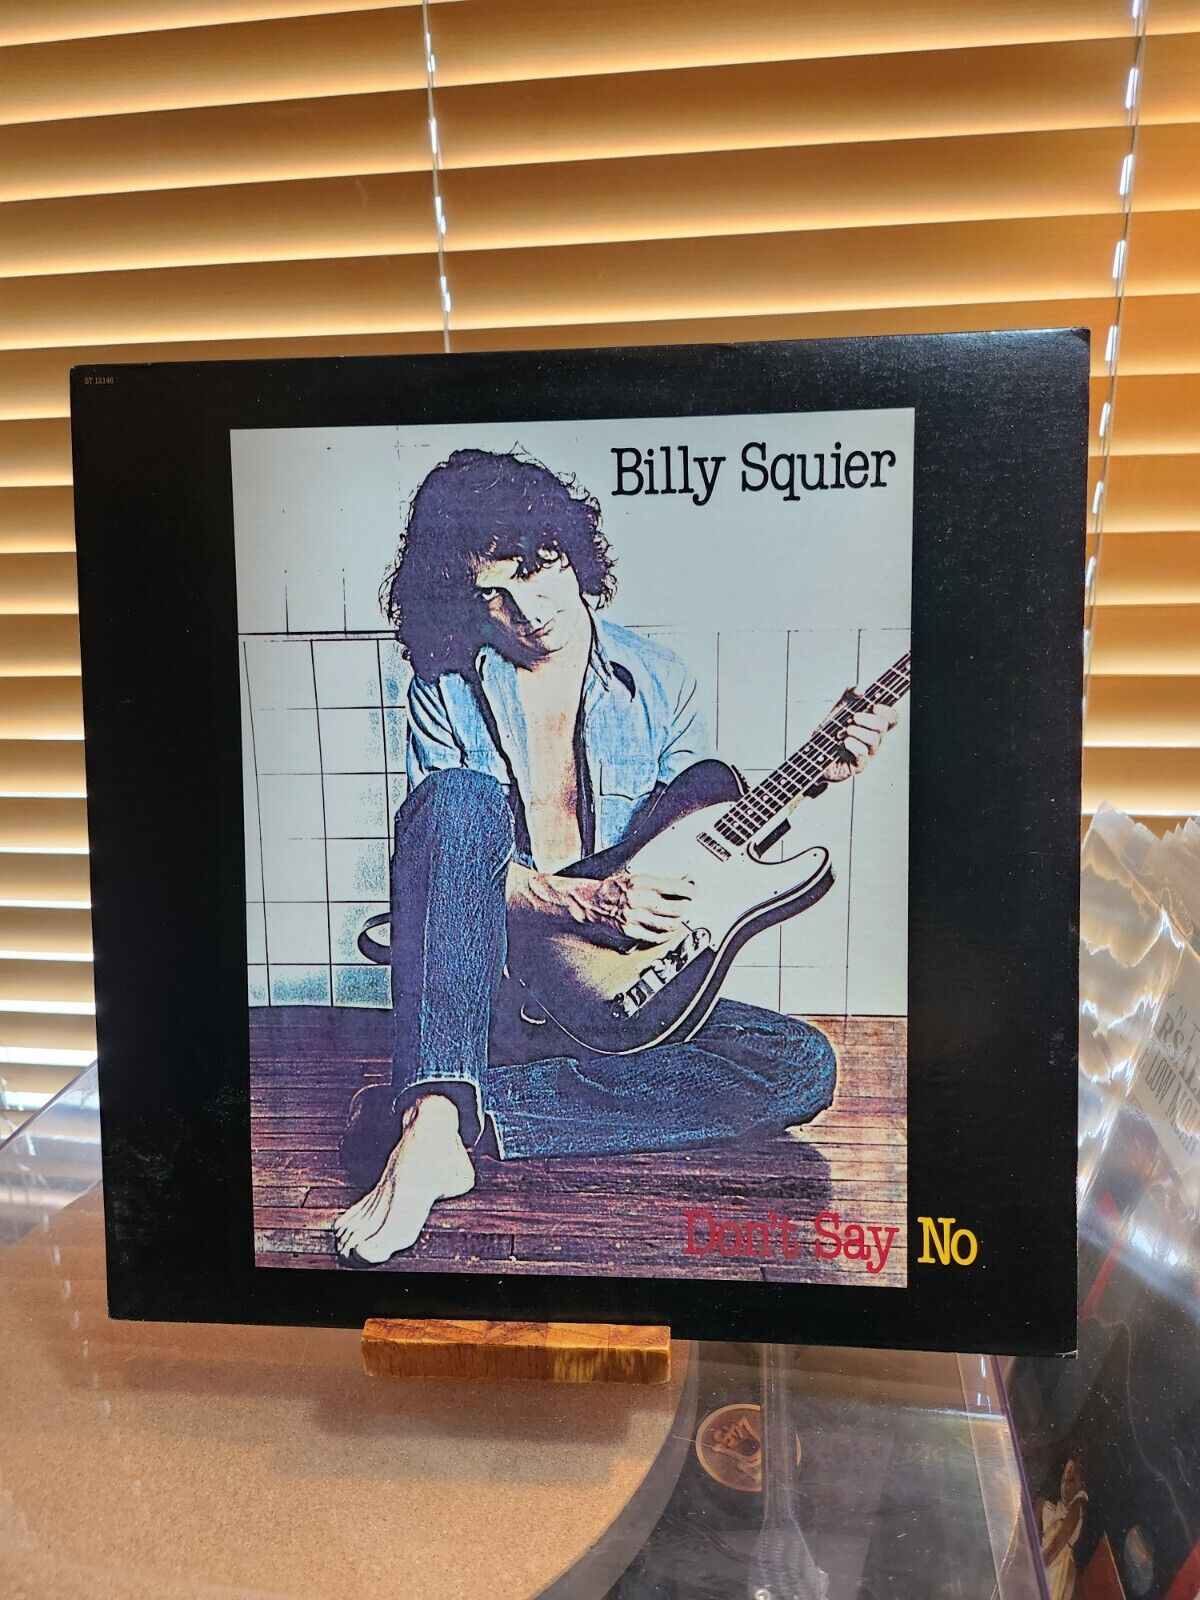 Billy Squier, Don\'t Say No, 1981 1st Capitol Stereo Press, ST-12146, VG+/VG+